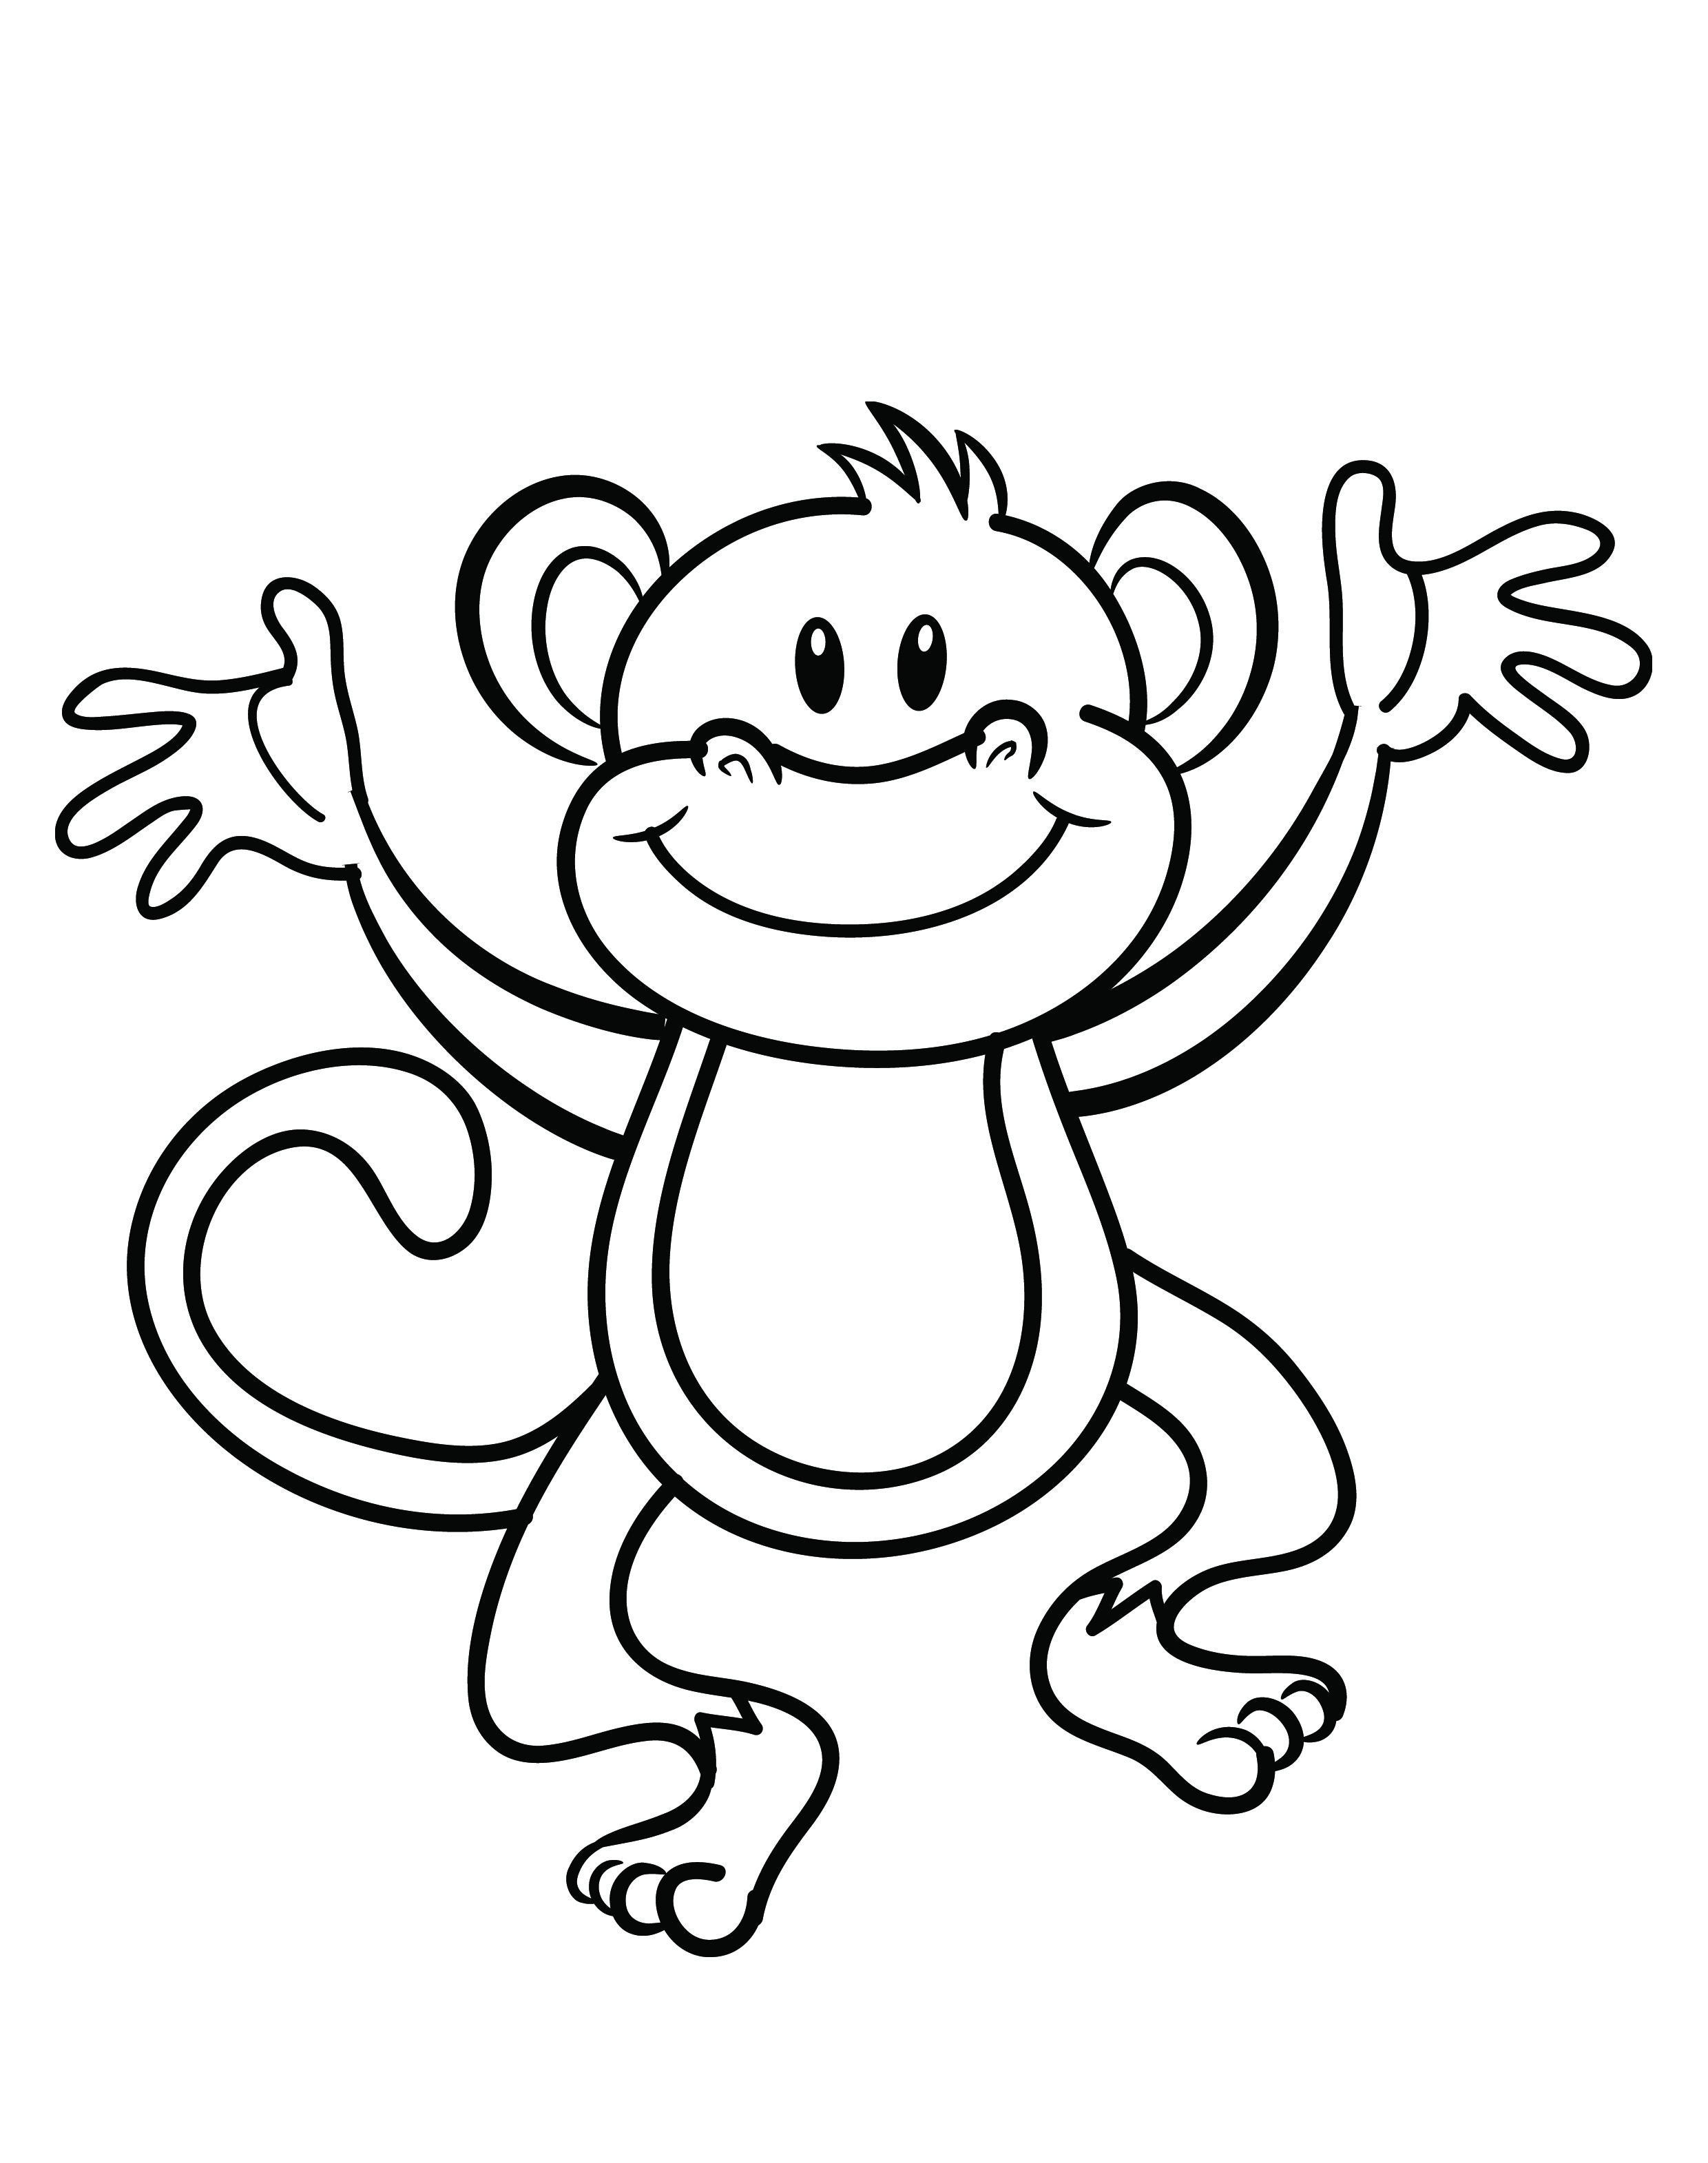 Sock Monkey Coloring Page Monkey Coloring Pages Free Download Best Monkey Coloring Pages On